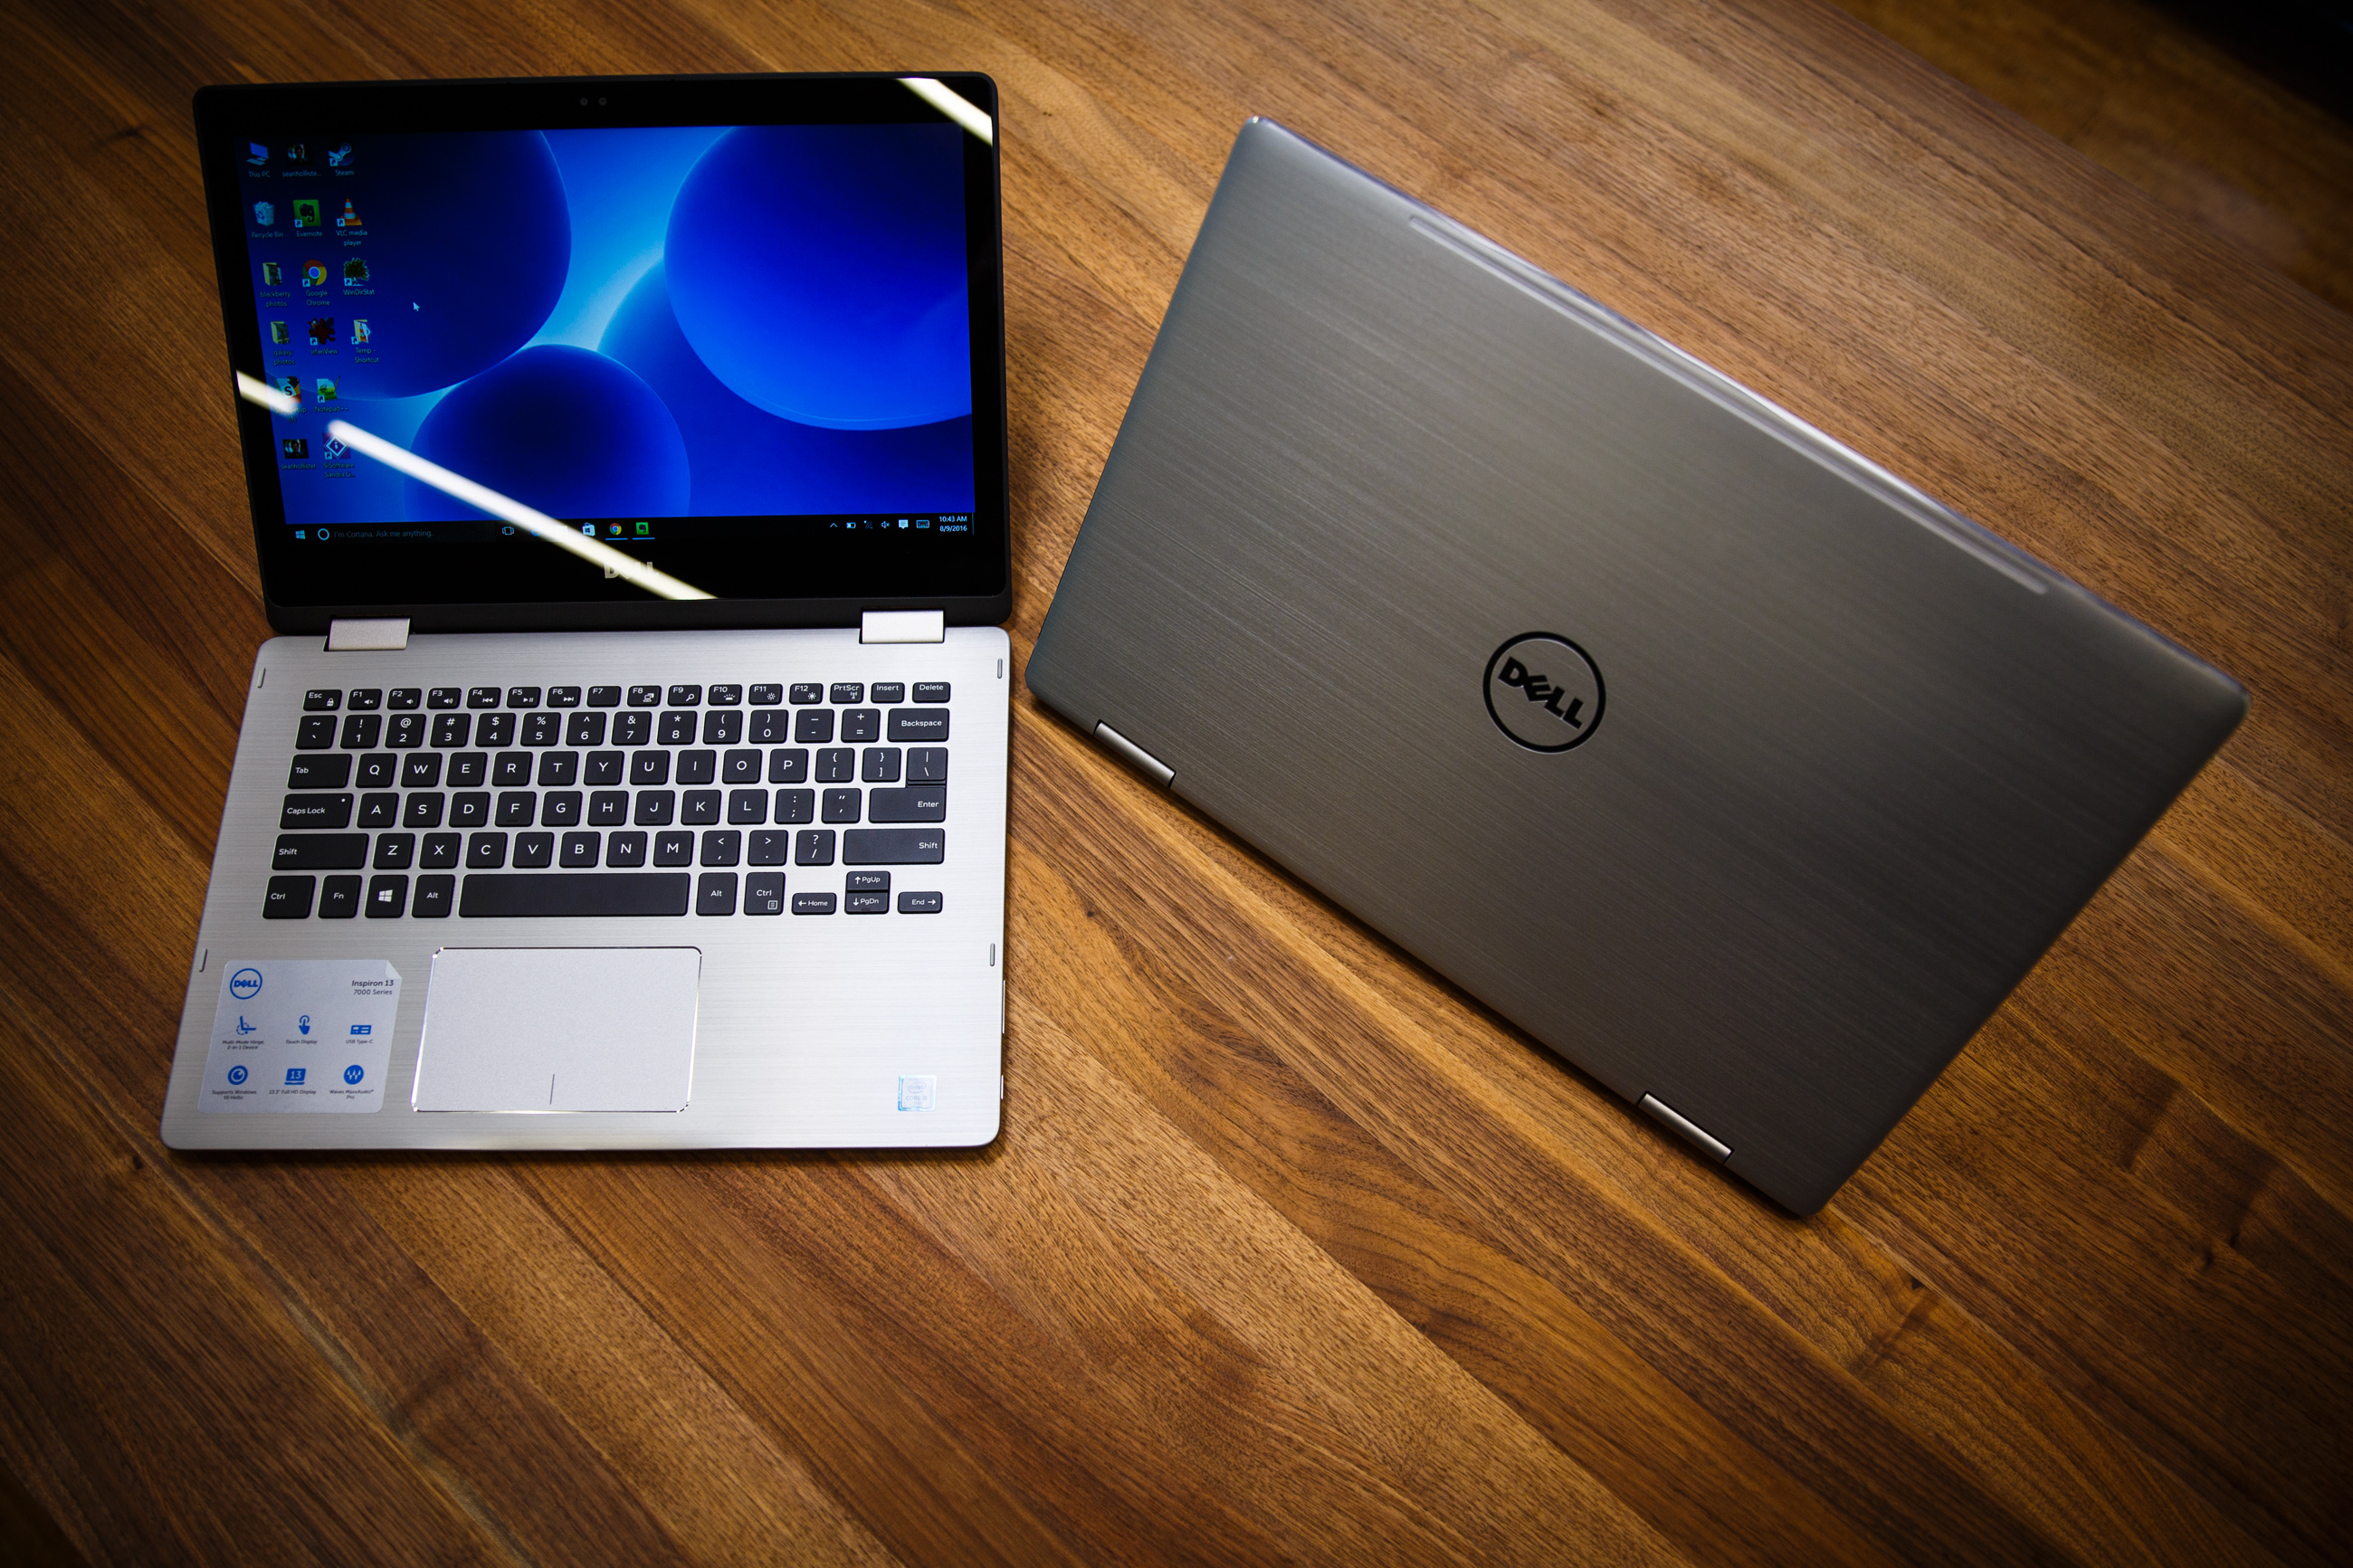 Dell Inspiron 7000 2-in-1 (2016) review: The king of budget laptops has  arrived - CNET